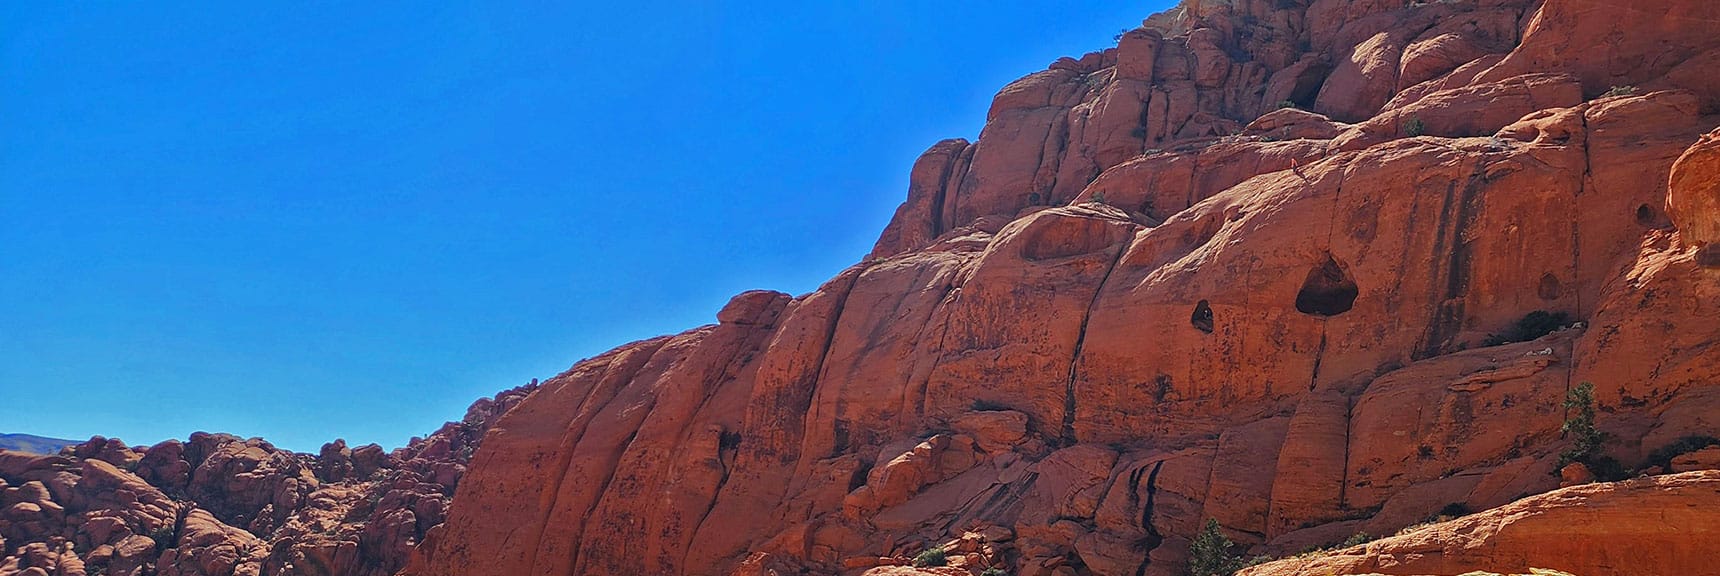 Can You See the Rock Climbers on the Cliffs Ahead? | Pink Goblin Loop | Calico Basin, Nevada